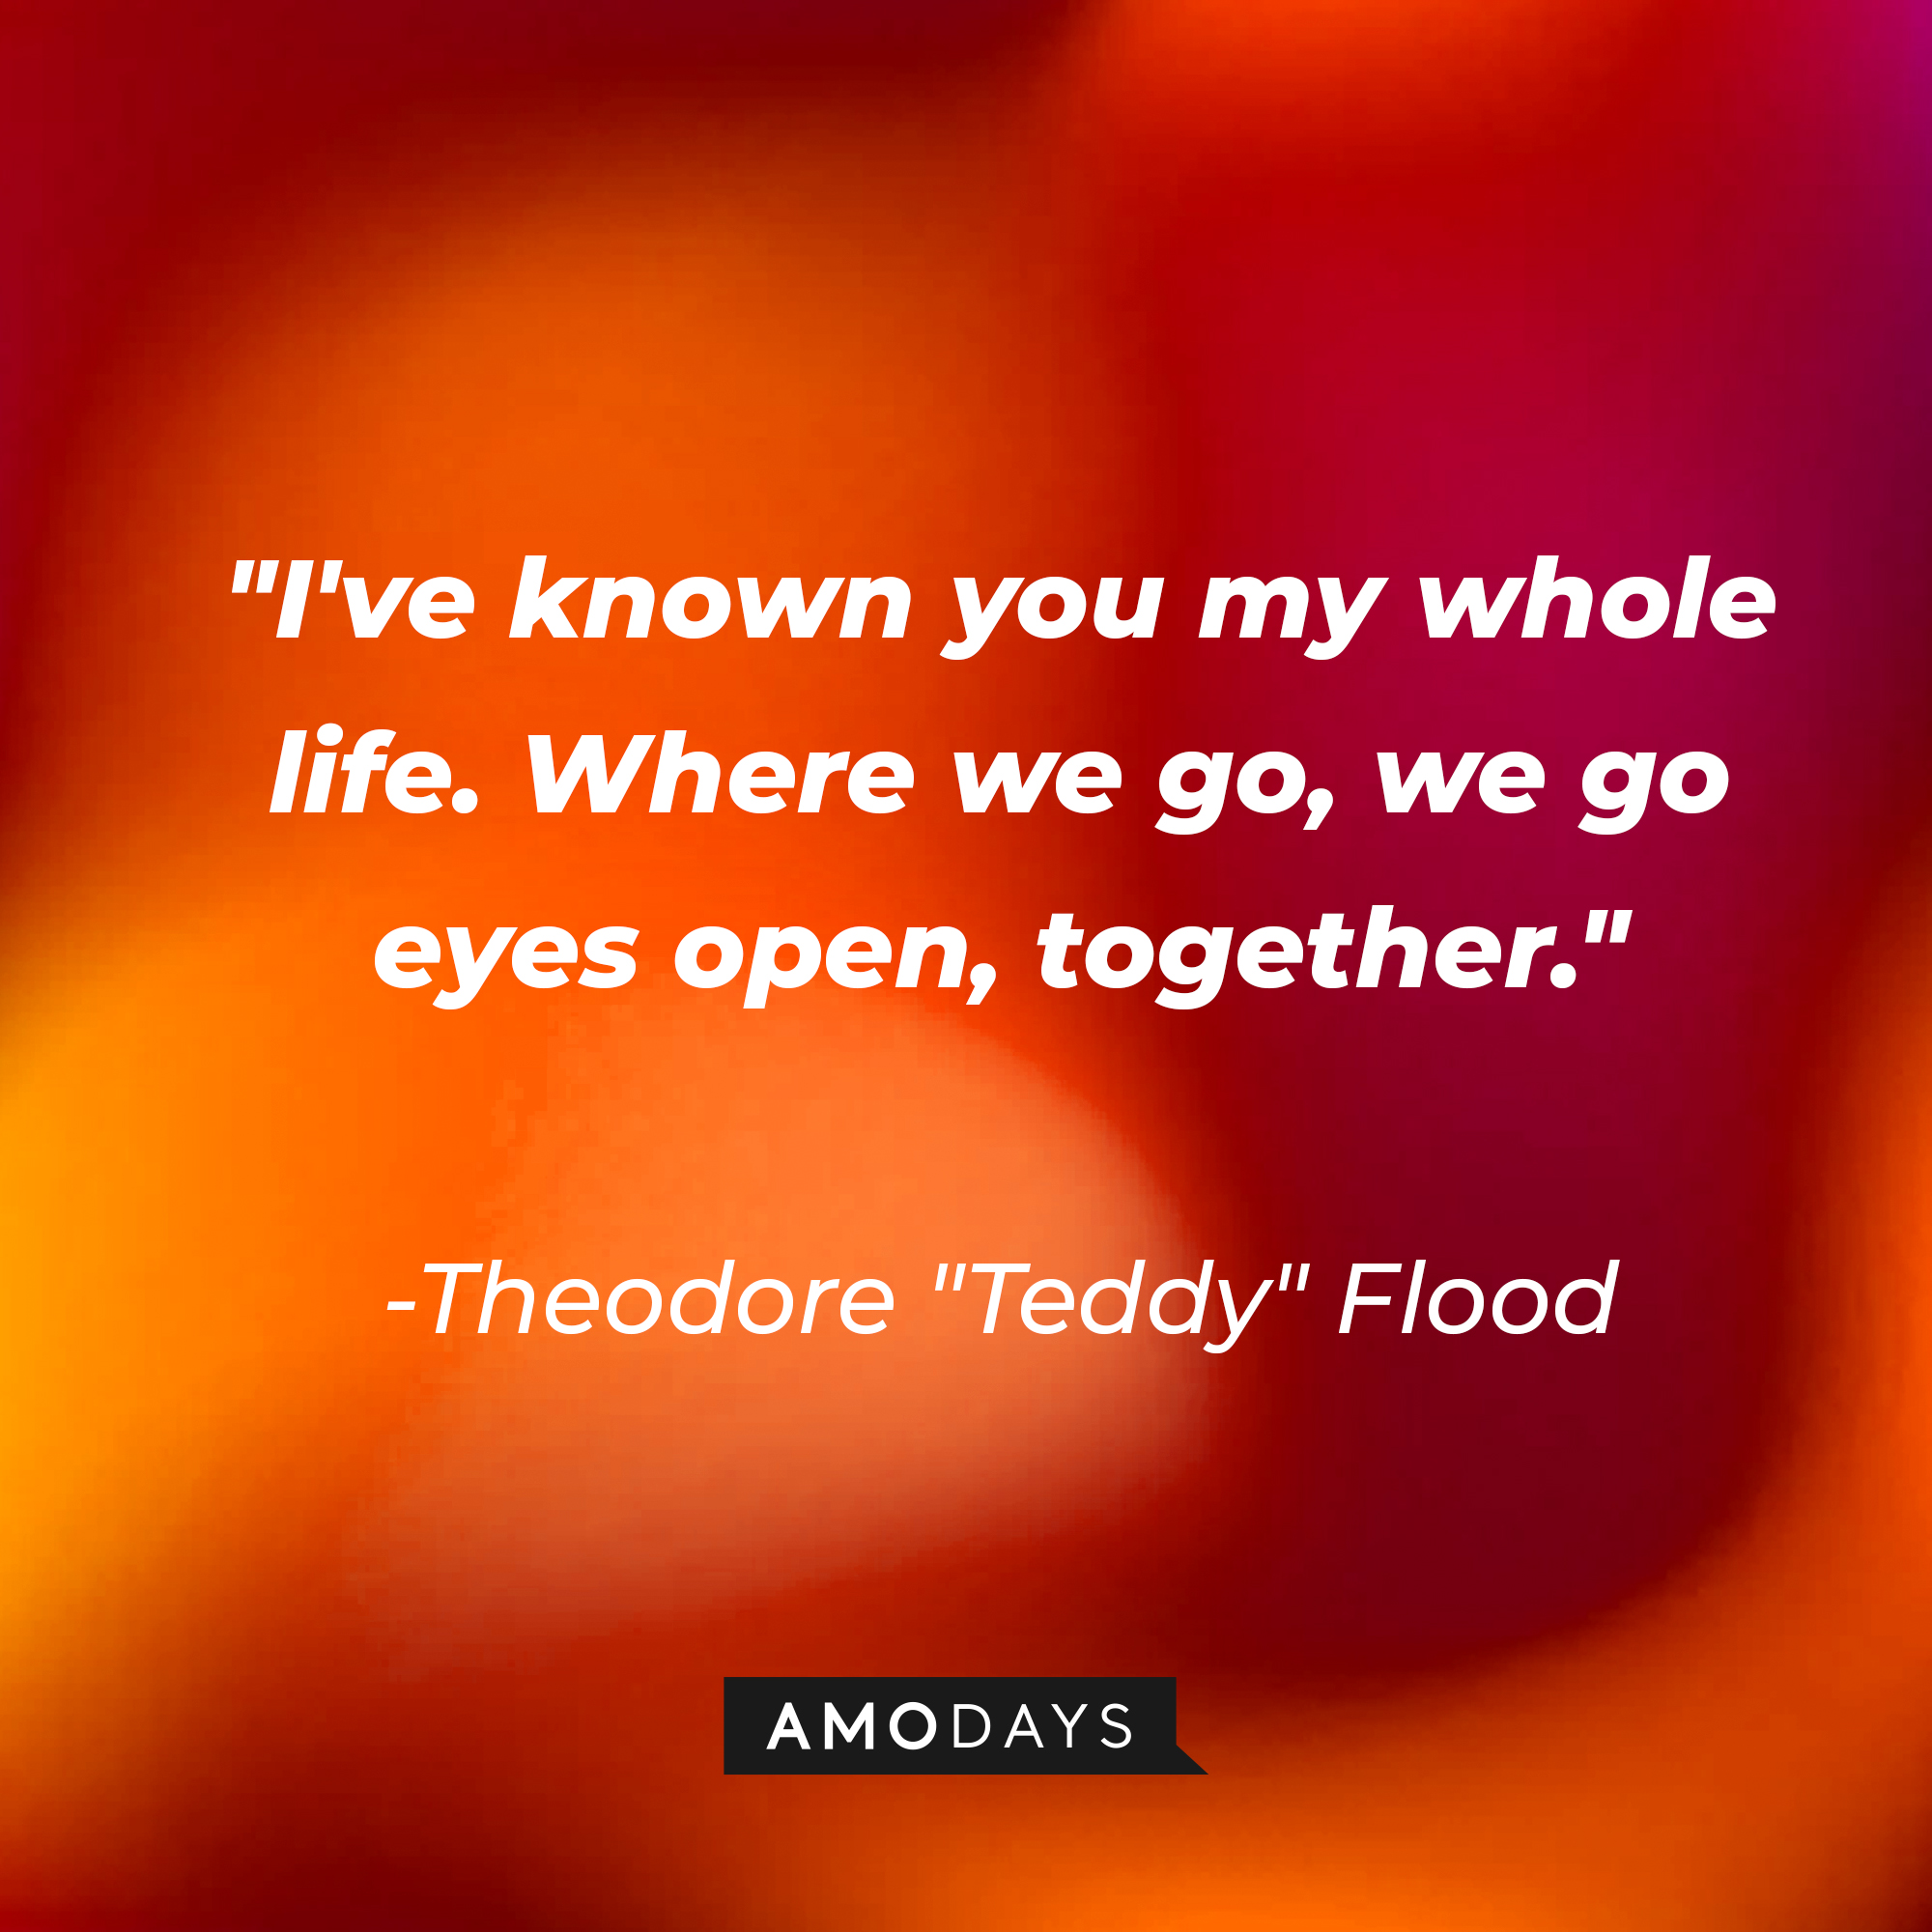 Theodore "Teddy" Flood's quote: "I've known you my whole life. Where we go, we go eyes open, together." | Source: AmoDays